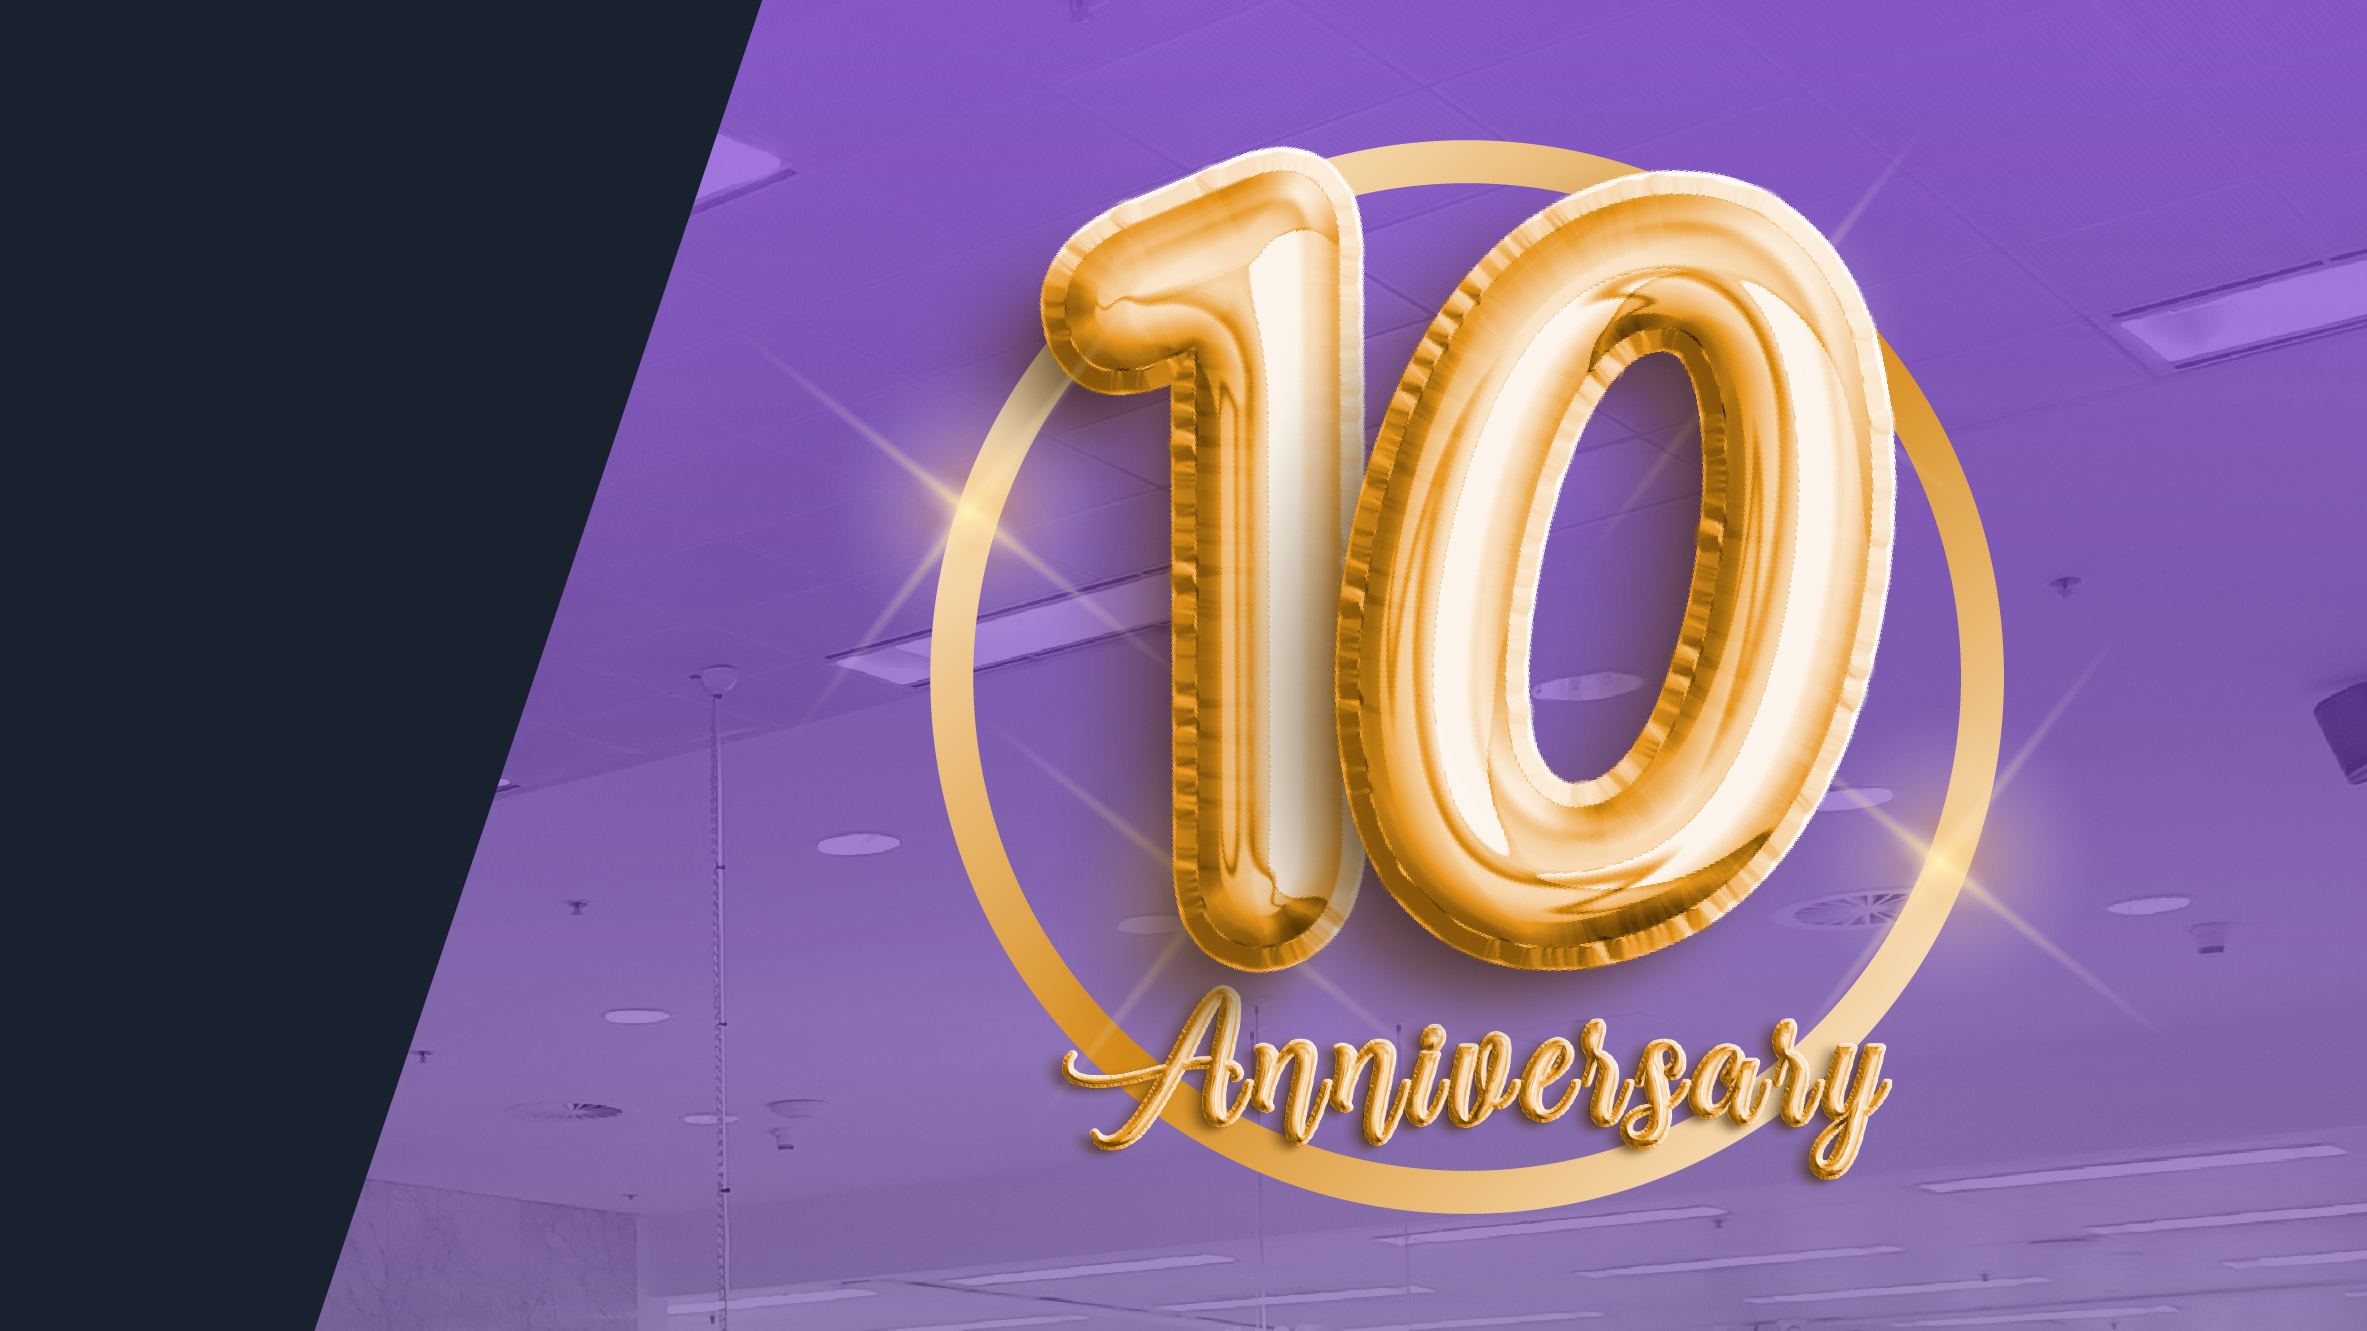 Cover Image for New Venue and Door-Prize Announced for 10 Year Anniversary Event!